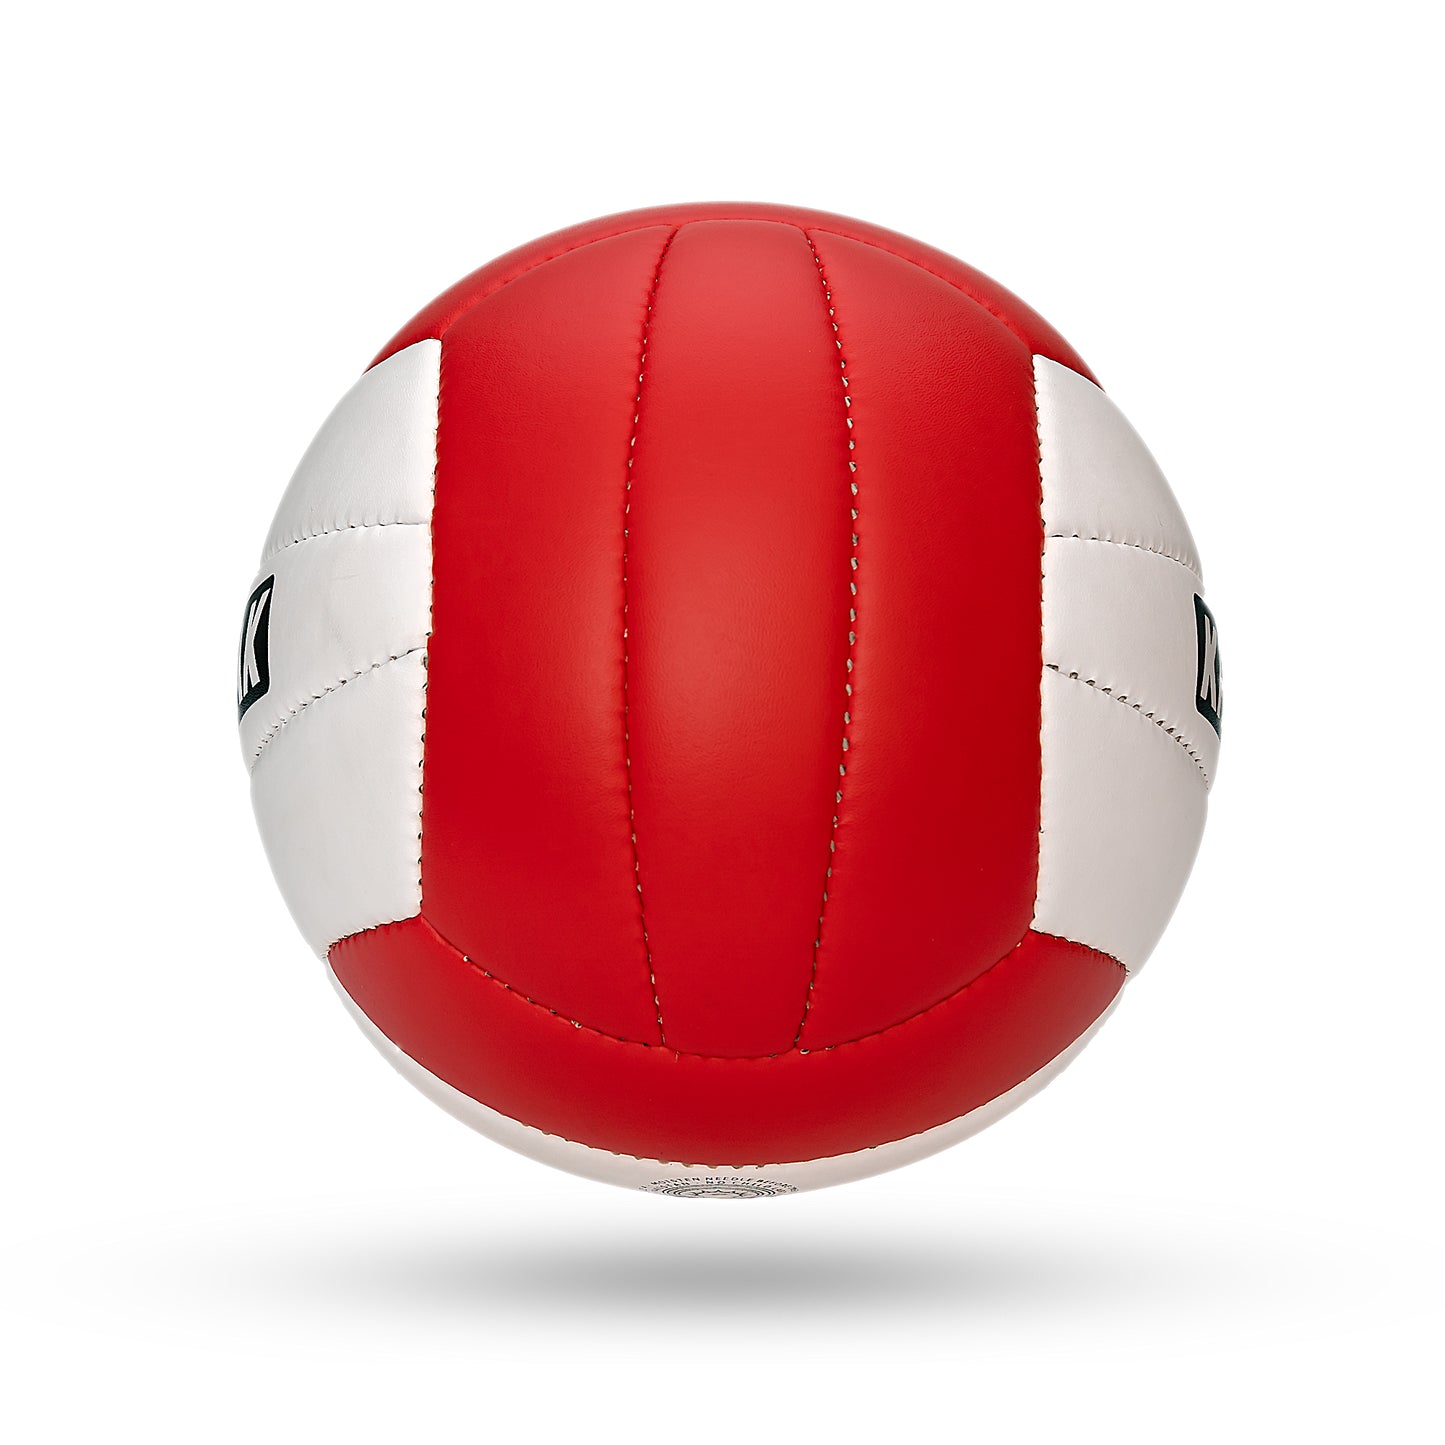 Kruzak Pro Volley Model Hand Stitched RED Volley Ball Toy - Indoor Outdoor Beach Ball for Kids Youth Adults, Beginners